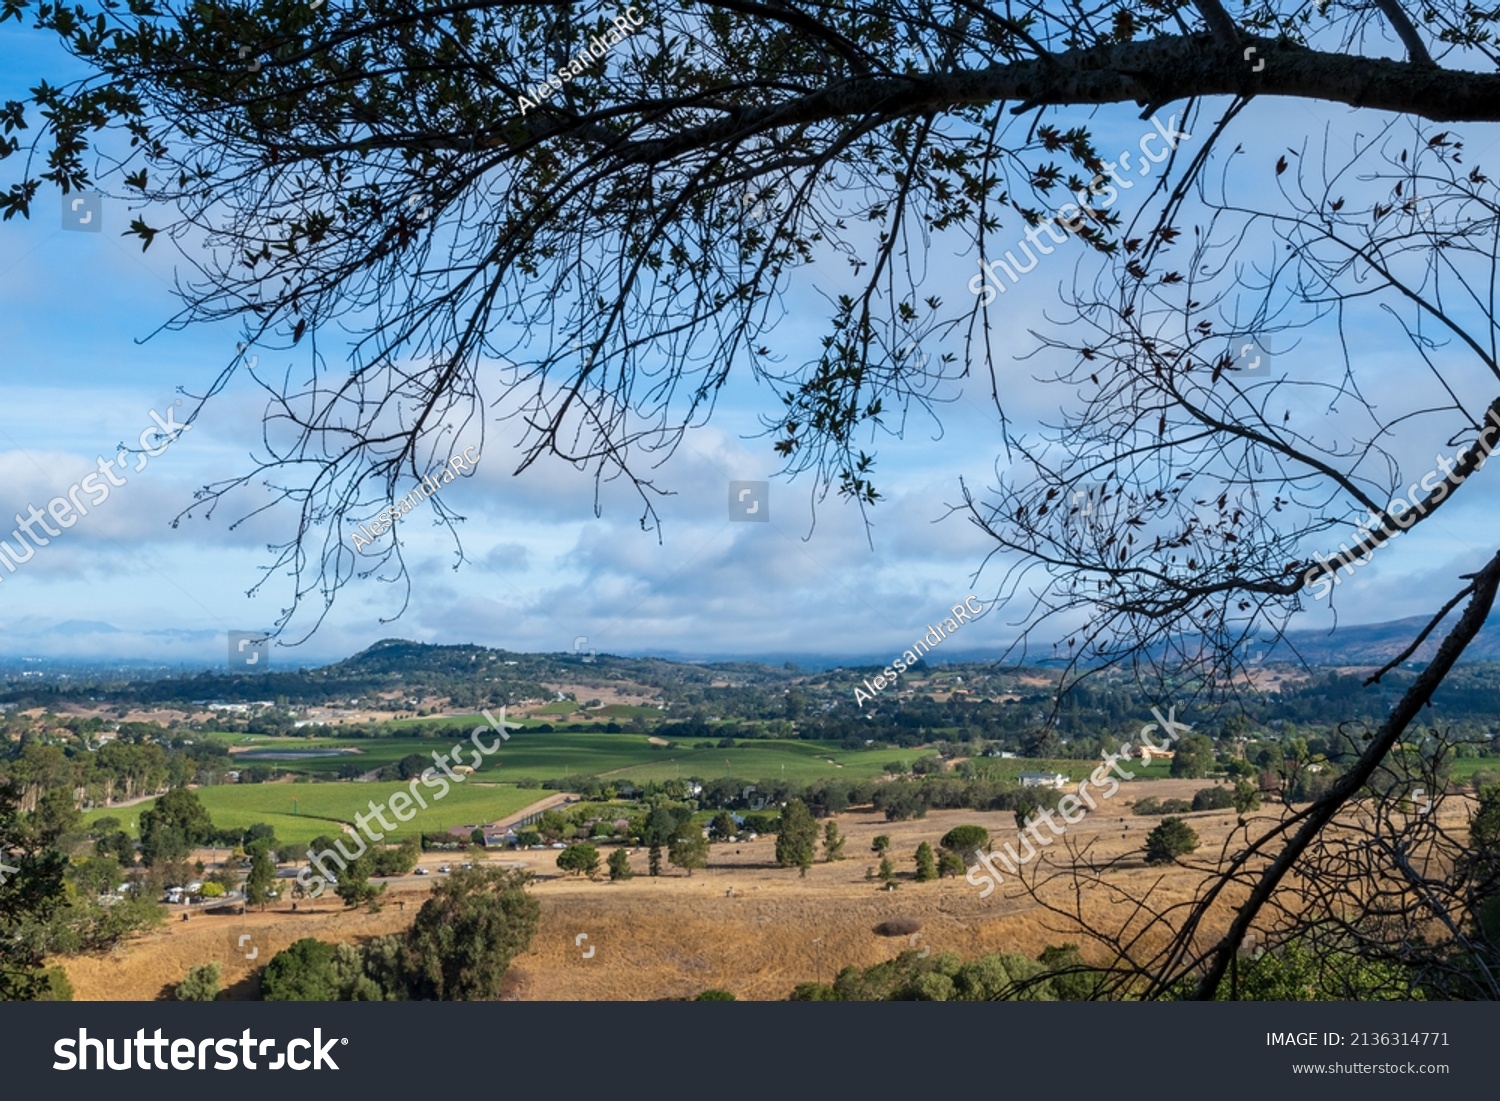 View of the Napa Valley from the Skyline wilderness park, California, USA.  #2136314771